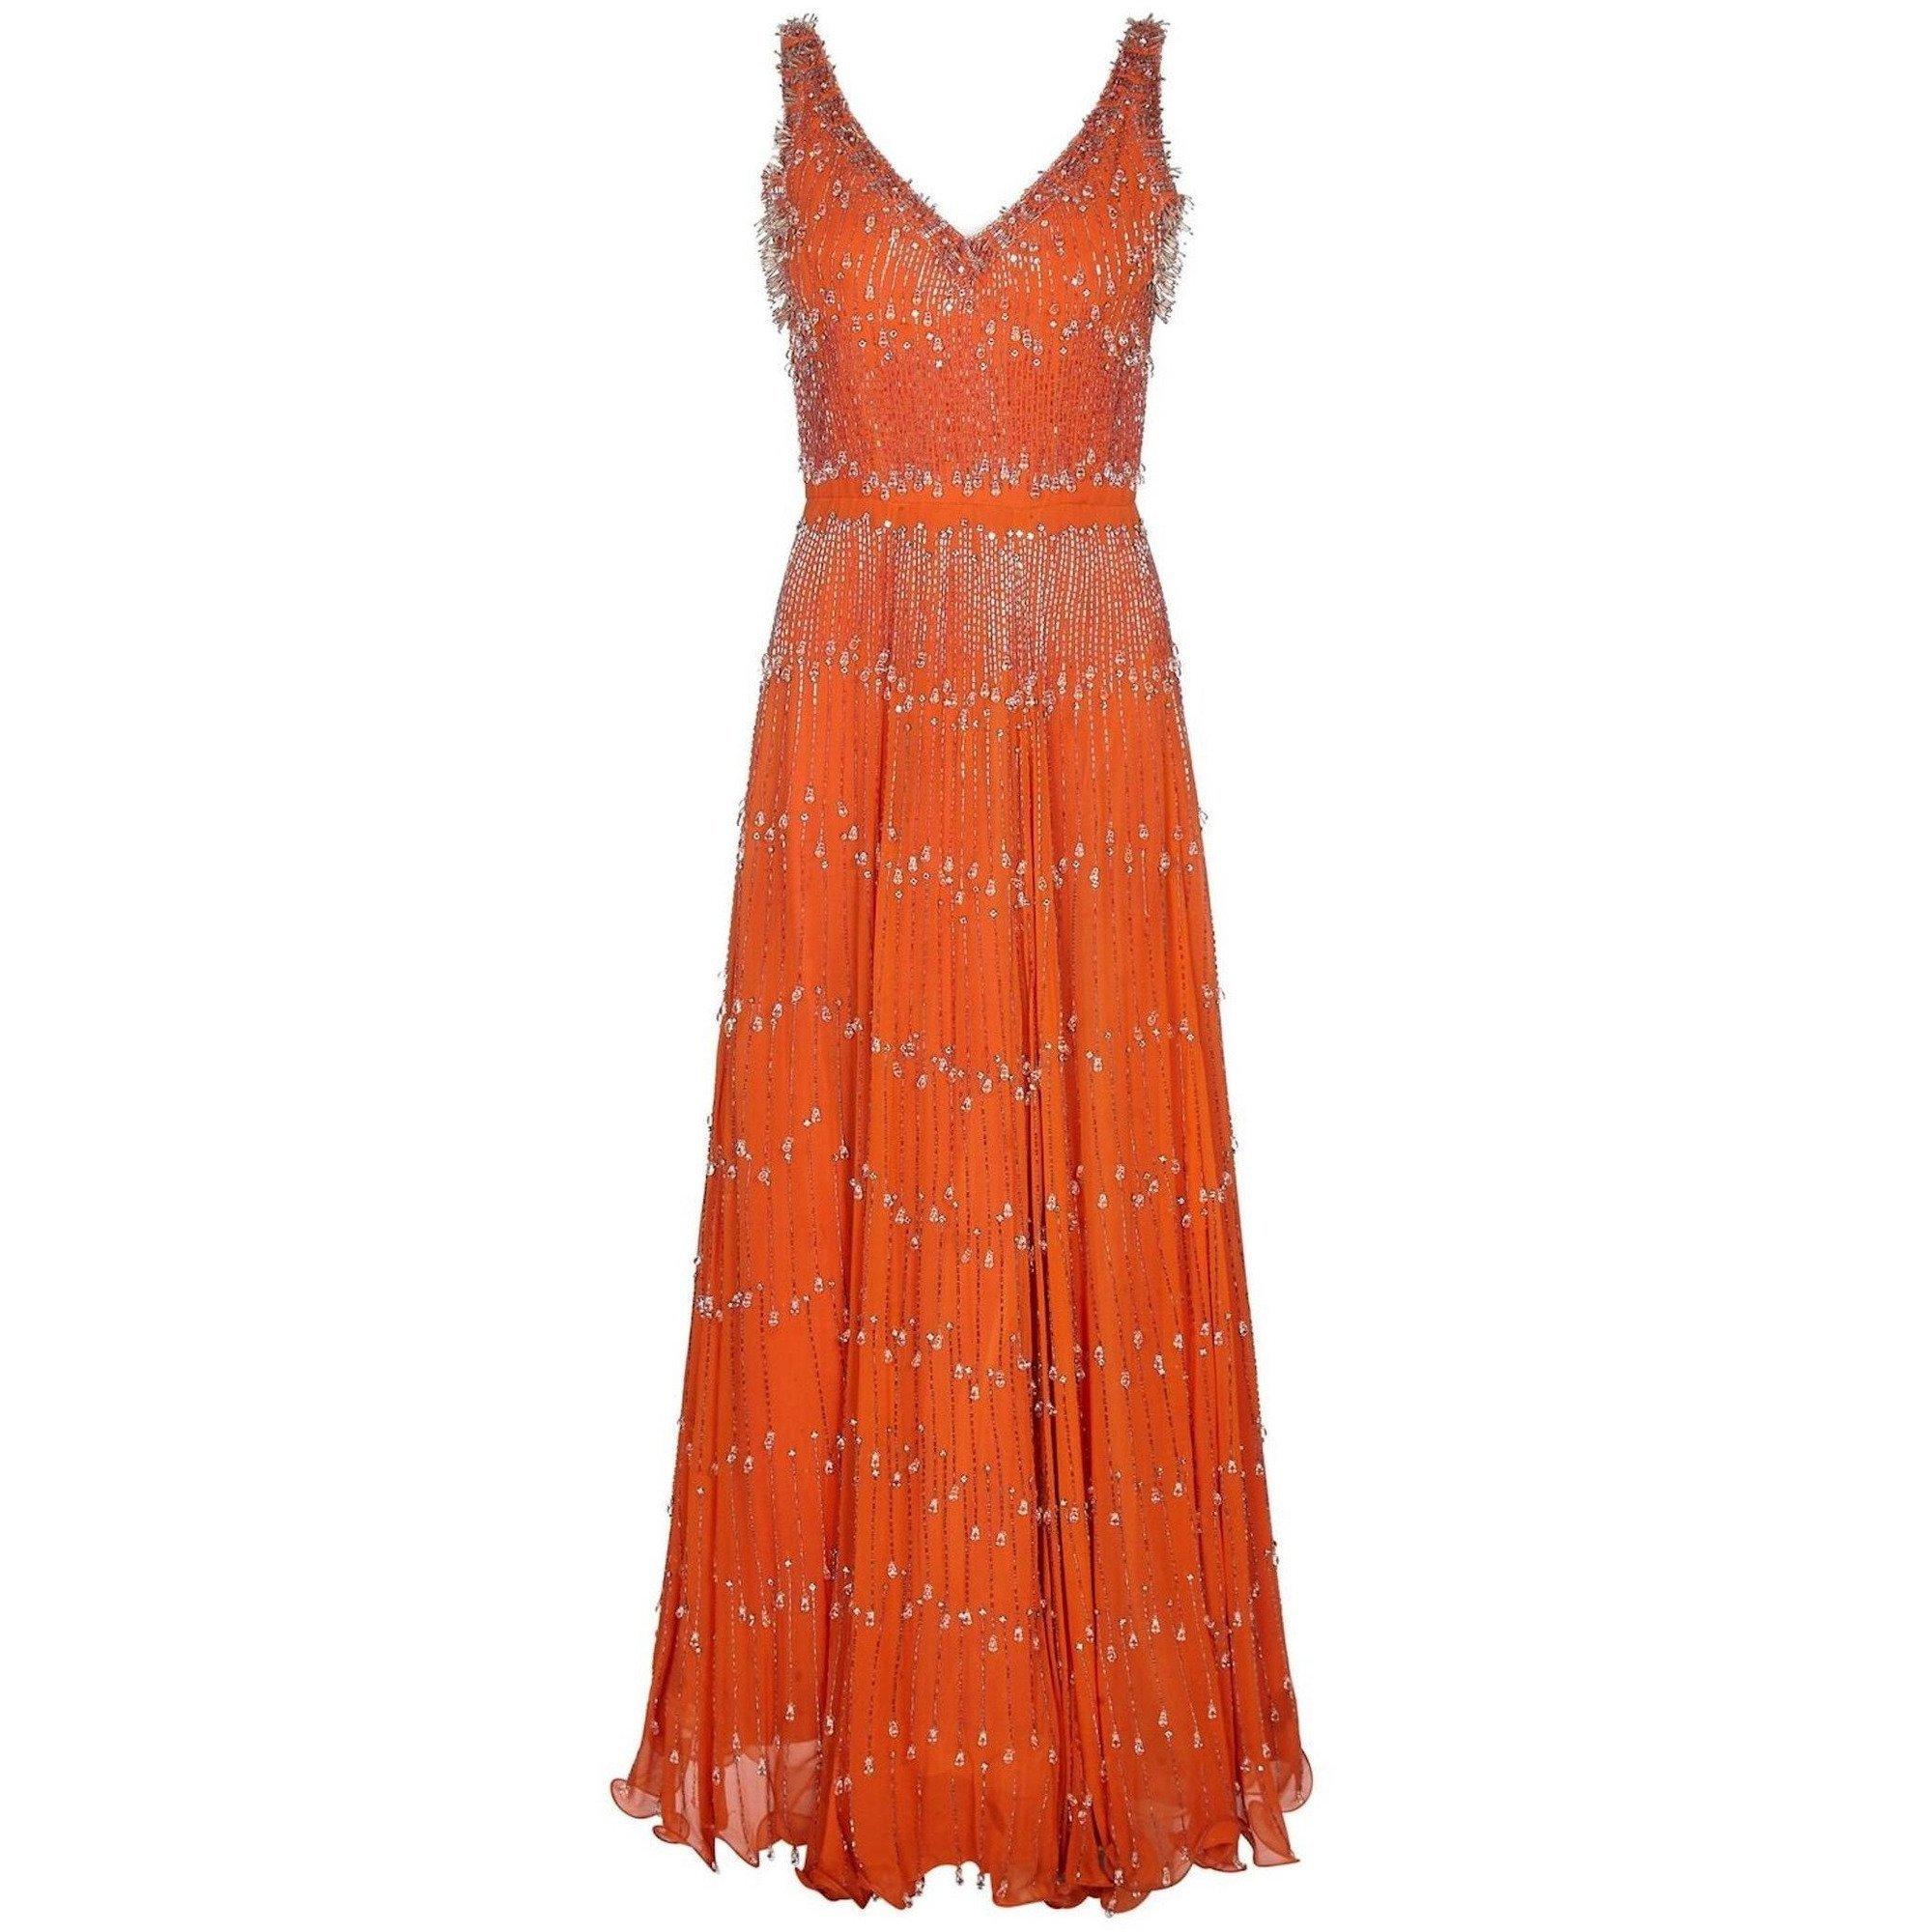 Couture 1960s Burnt Orange Silk Chiffon Gown with Crystal Bead Embellishment In Excellent Condition For Sale In London, GB